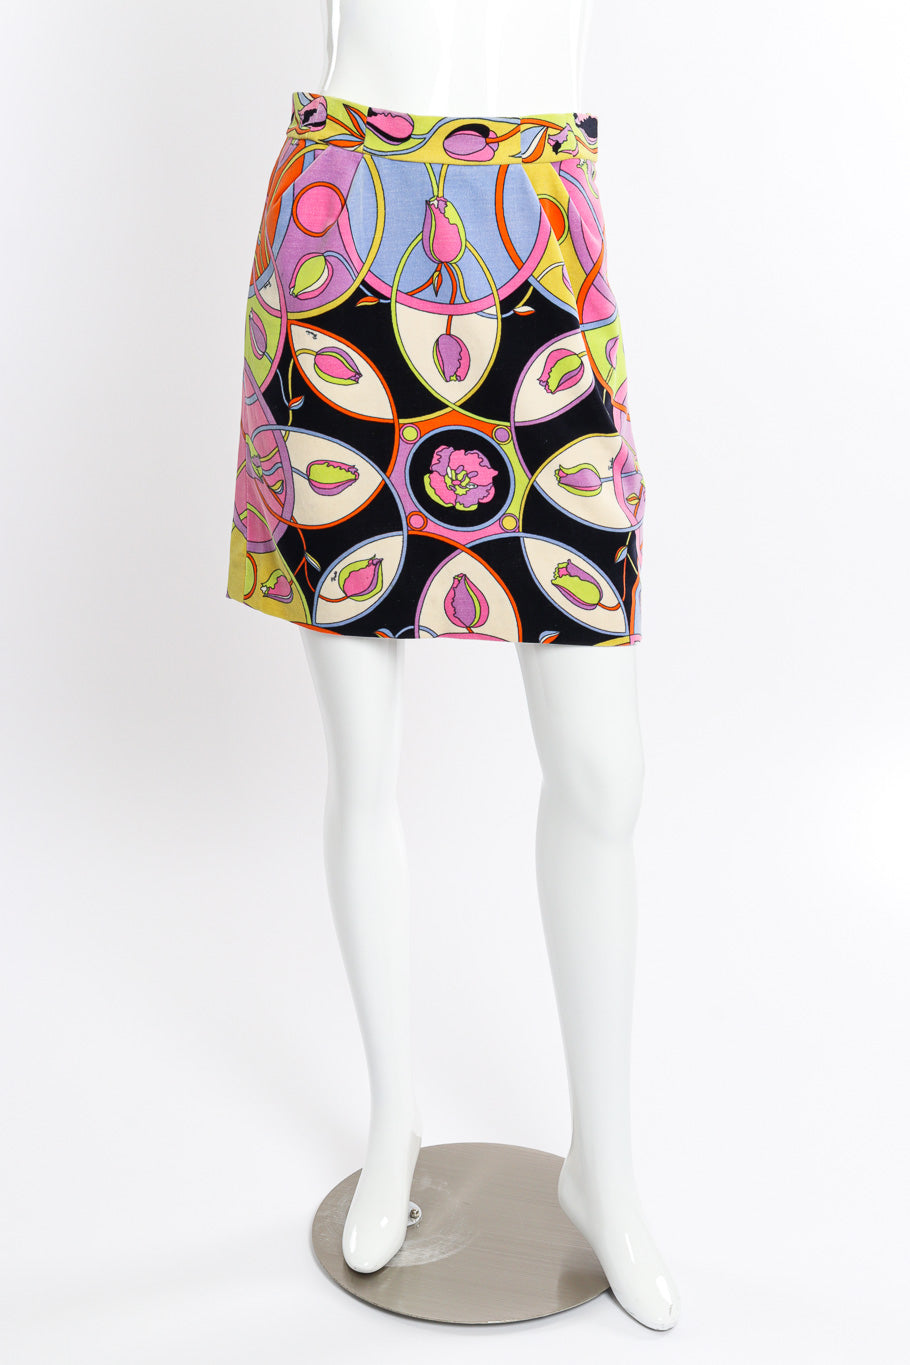 Velvet Tulip Skirt by Pucci on mannequin front @recessla